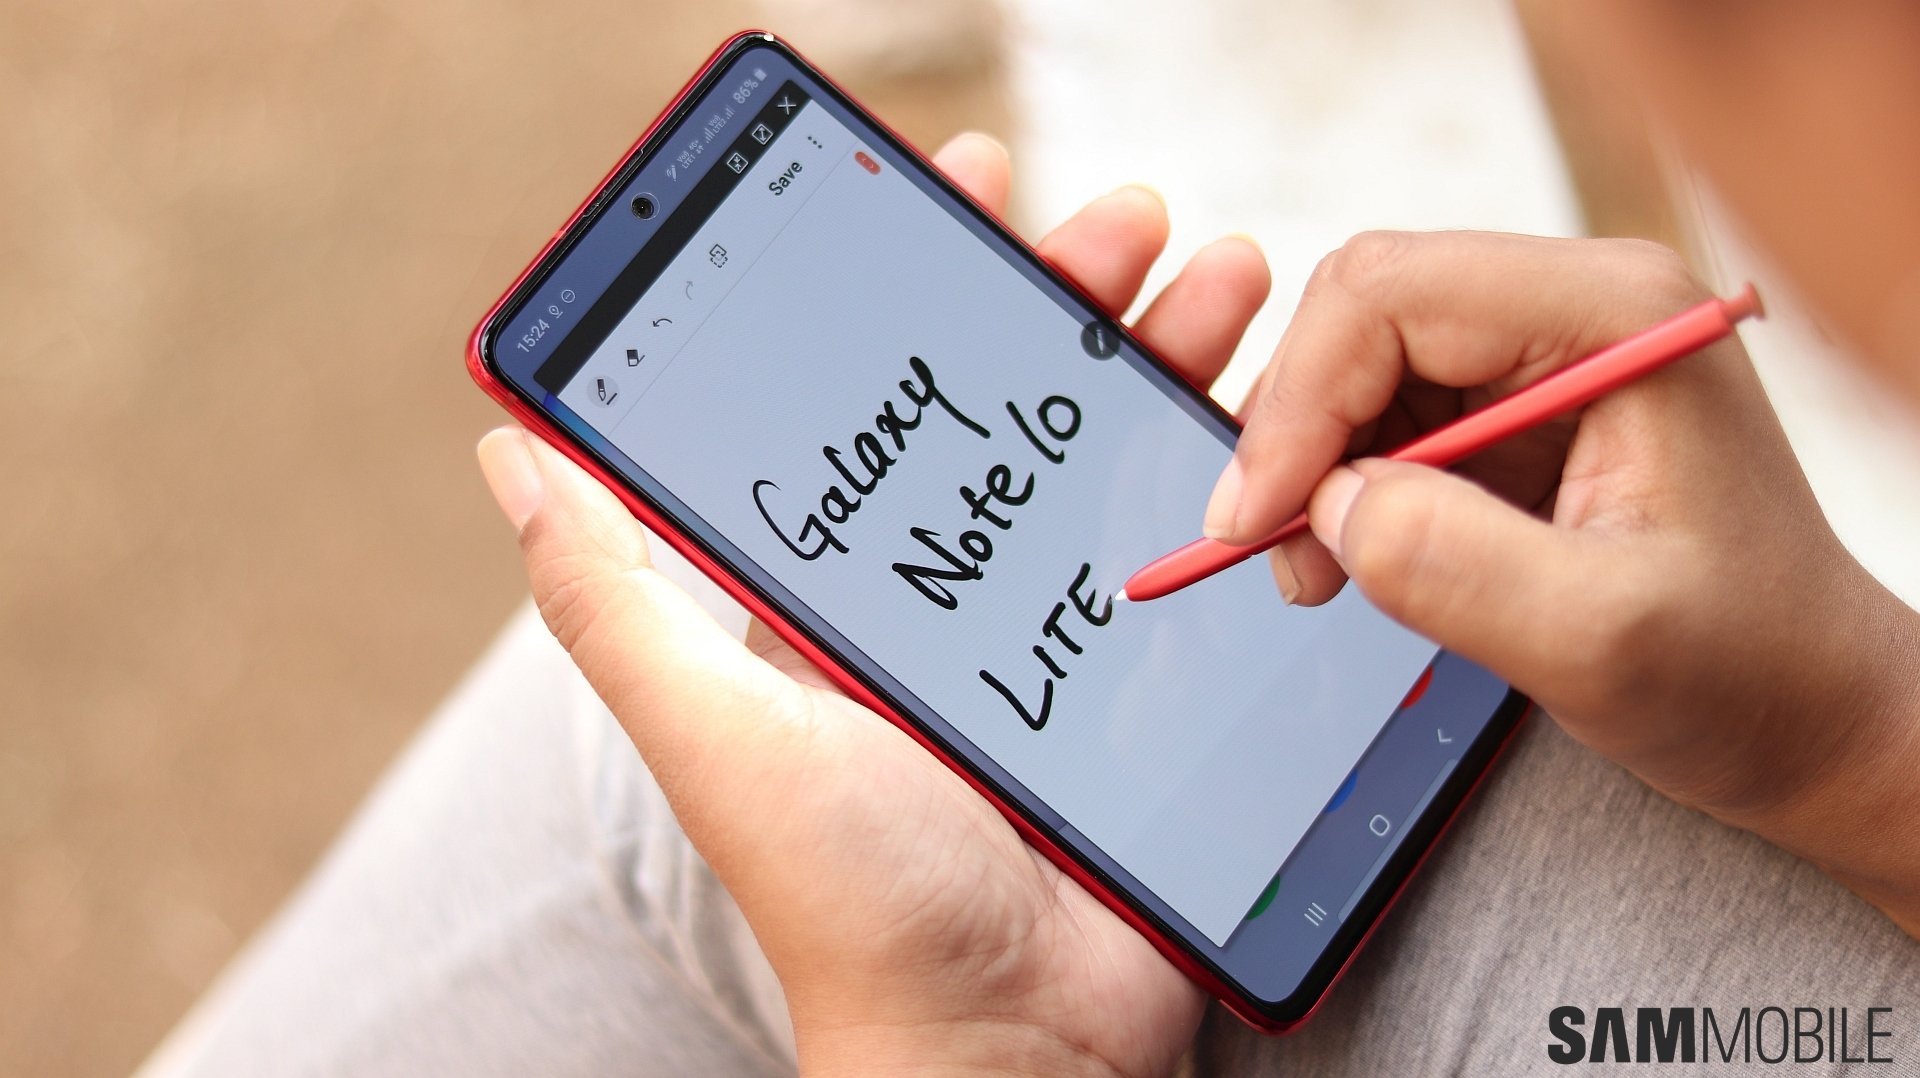 Samsung Galaxy Note 10 Lite Review: The Affordable Galaxy Note You Always  Wanted - Gizbot Reviews